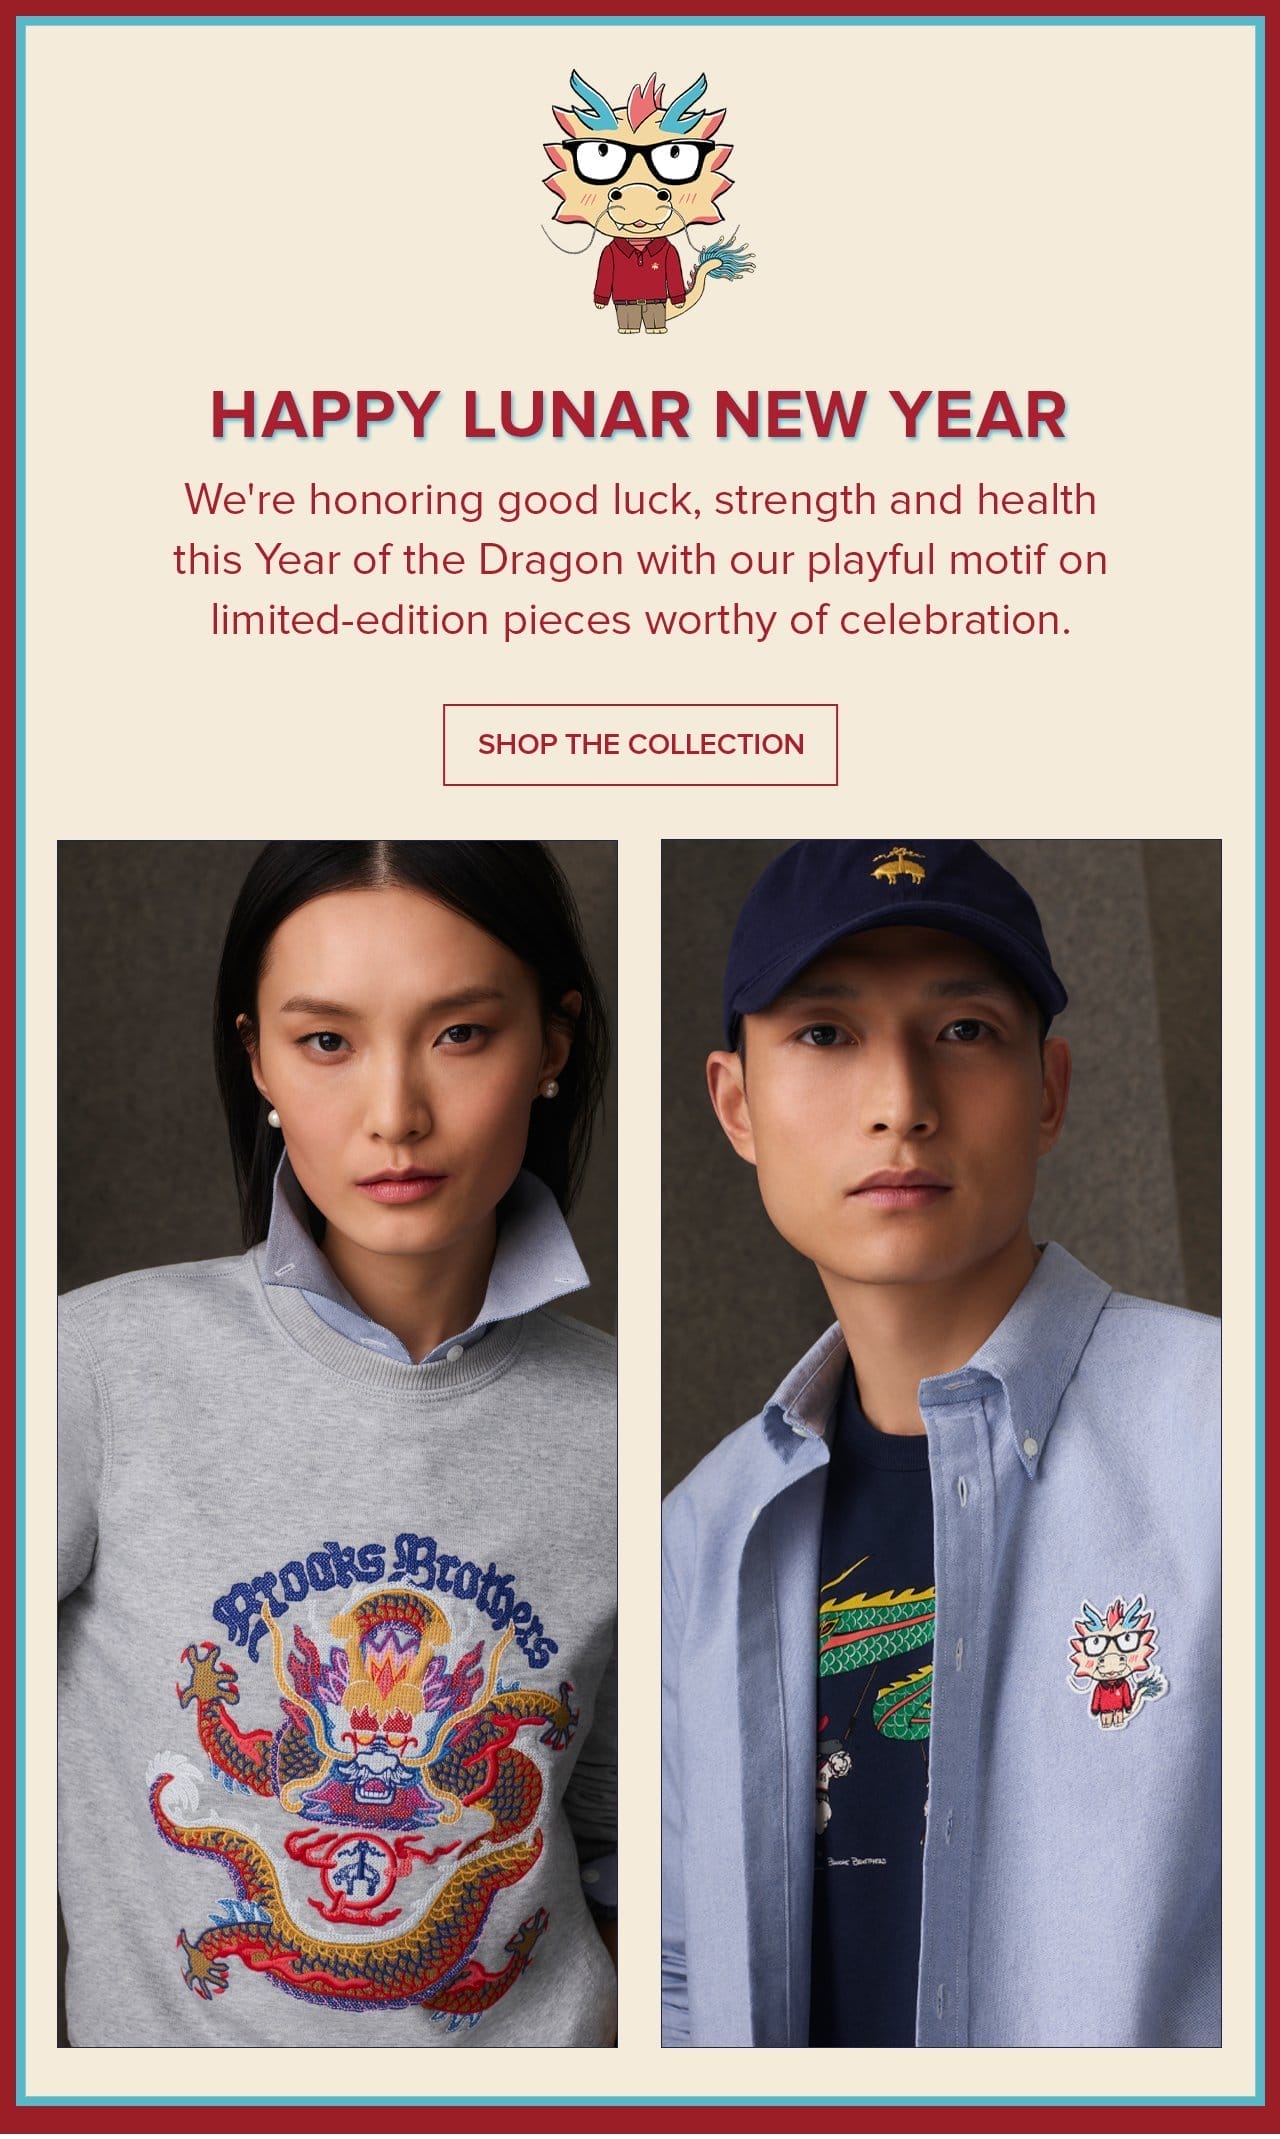 Happy Lunar New Year We're honoring good luck, strength and health this Year of the Dragon with our playful motif on limited-edition pieces worthy of celebration. Shop the Collection